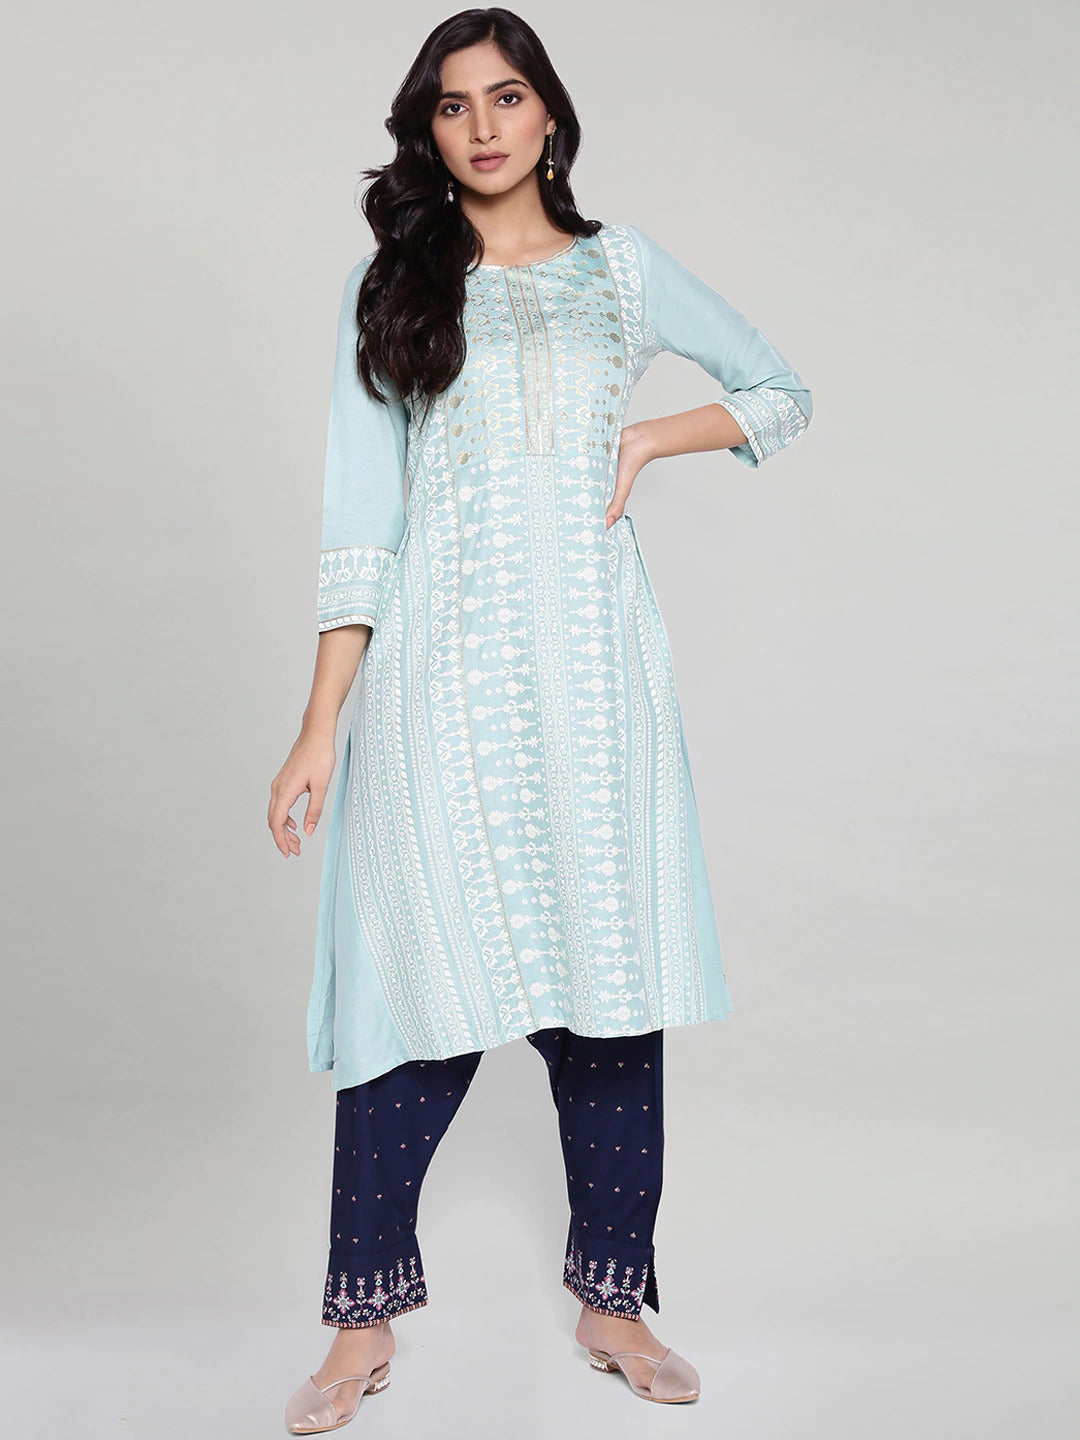 Navy Blue Print Salwar Indian Clothing in Denver, CO, Aurora, CO, Boulder, CO, Fort Collins, CO, Colorado Springs, CO, Parker, CO, Highlands Ranch, CO, Cherry Creek, CO, Centennial, CO, and Longmont, CO. NATIONWIDE SHIPPING USA- India Fashion X